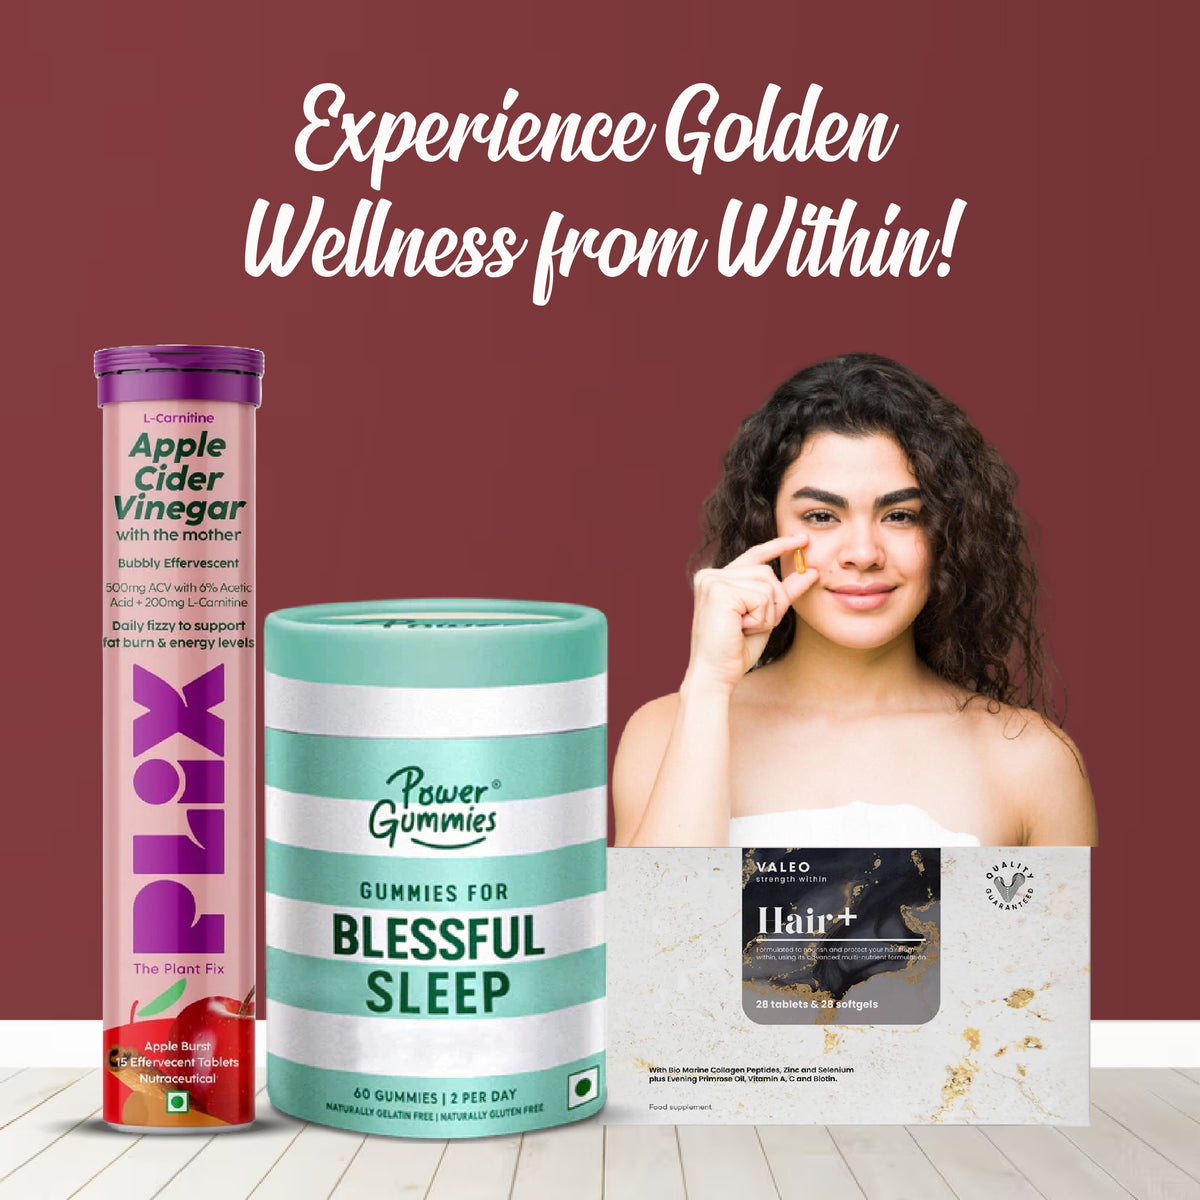 Golden Wellness Package: Shine Inside & Out ✨